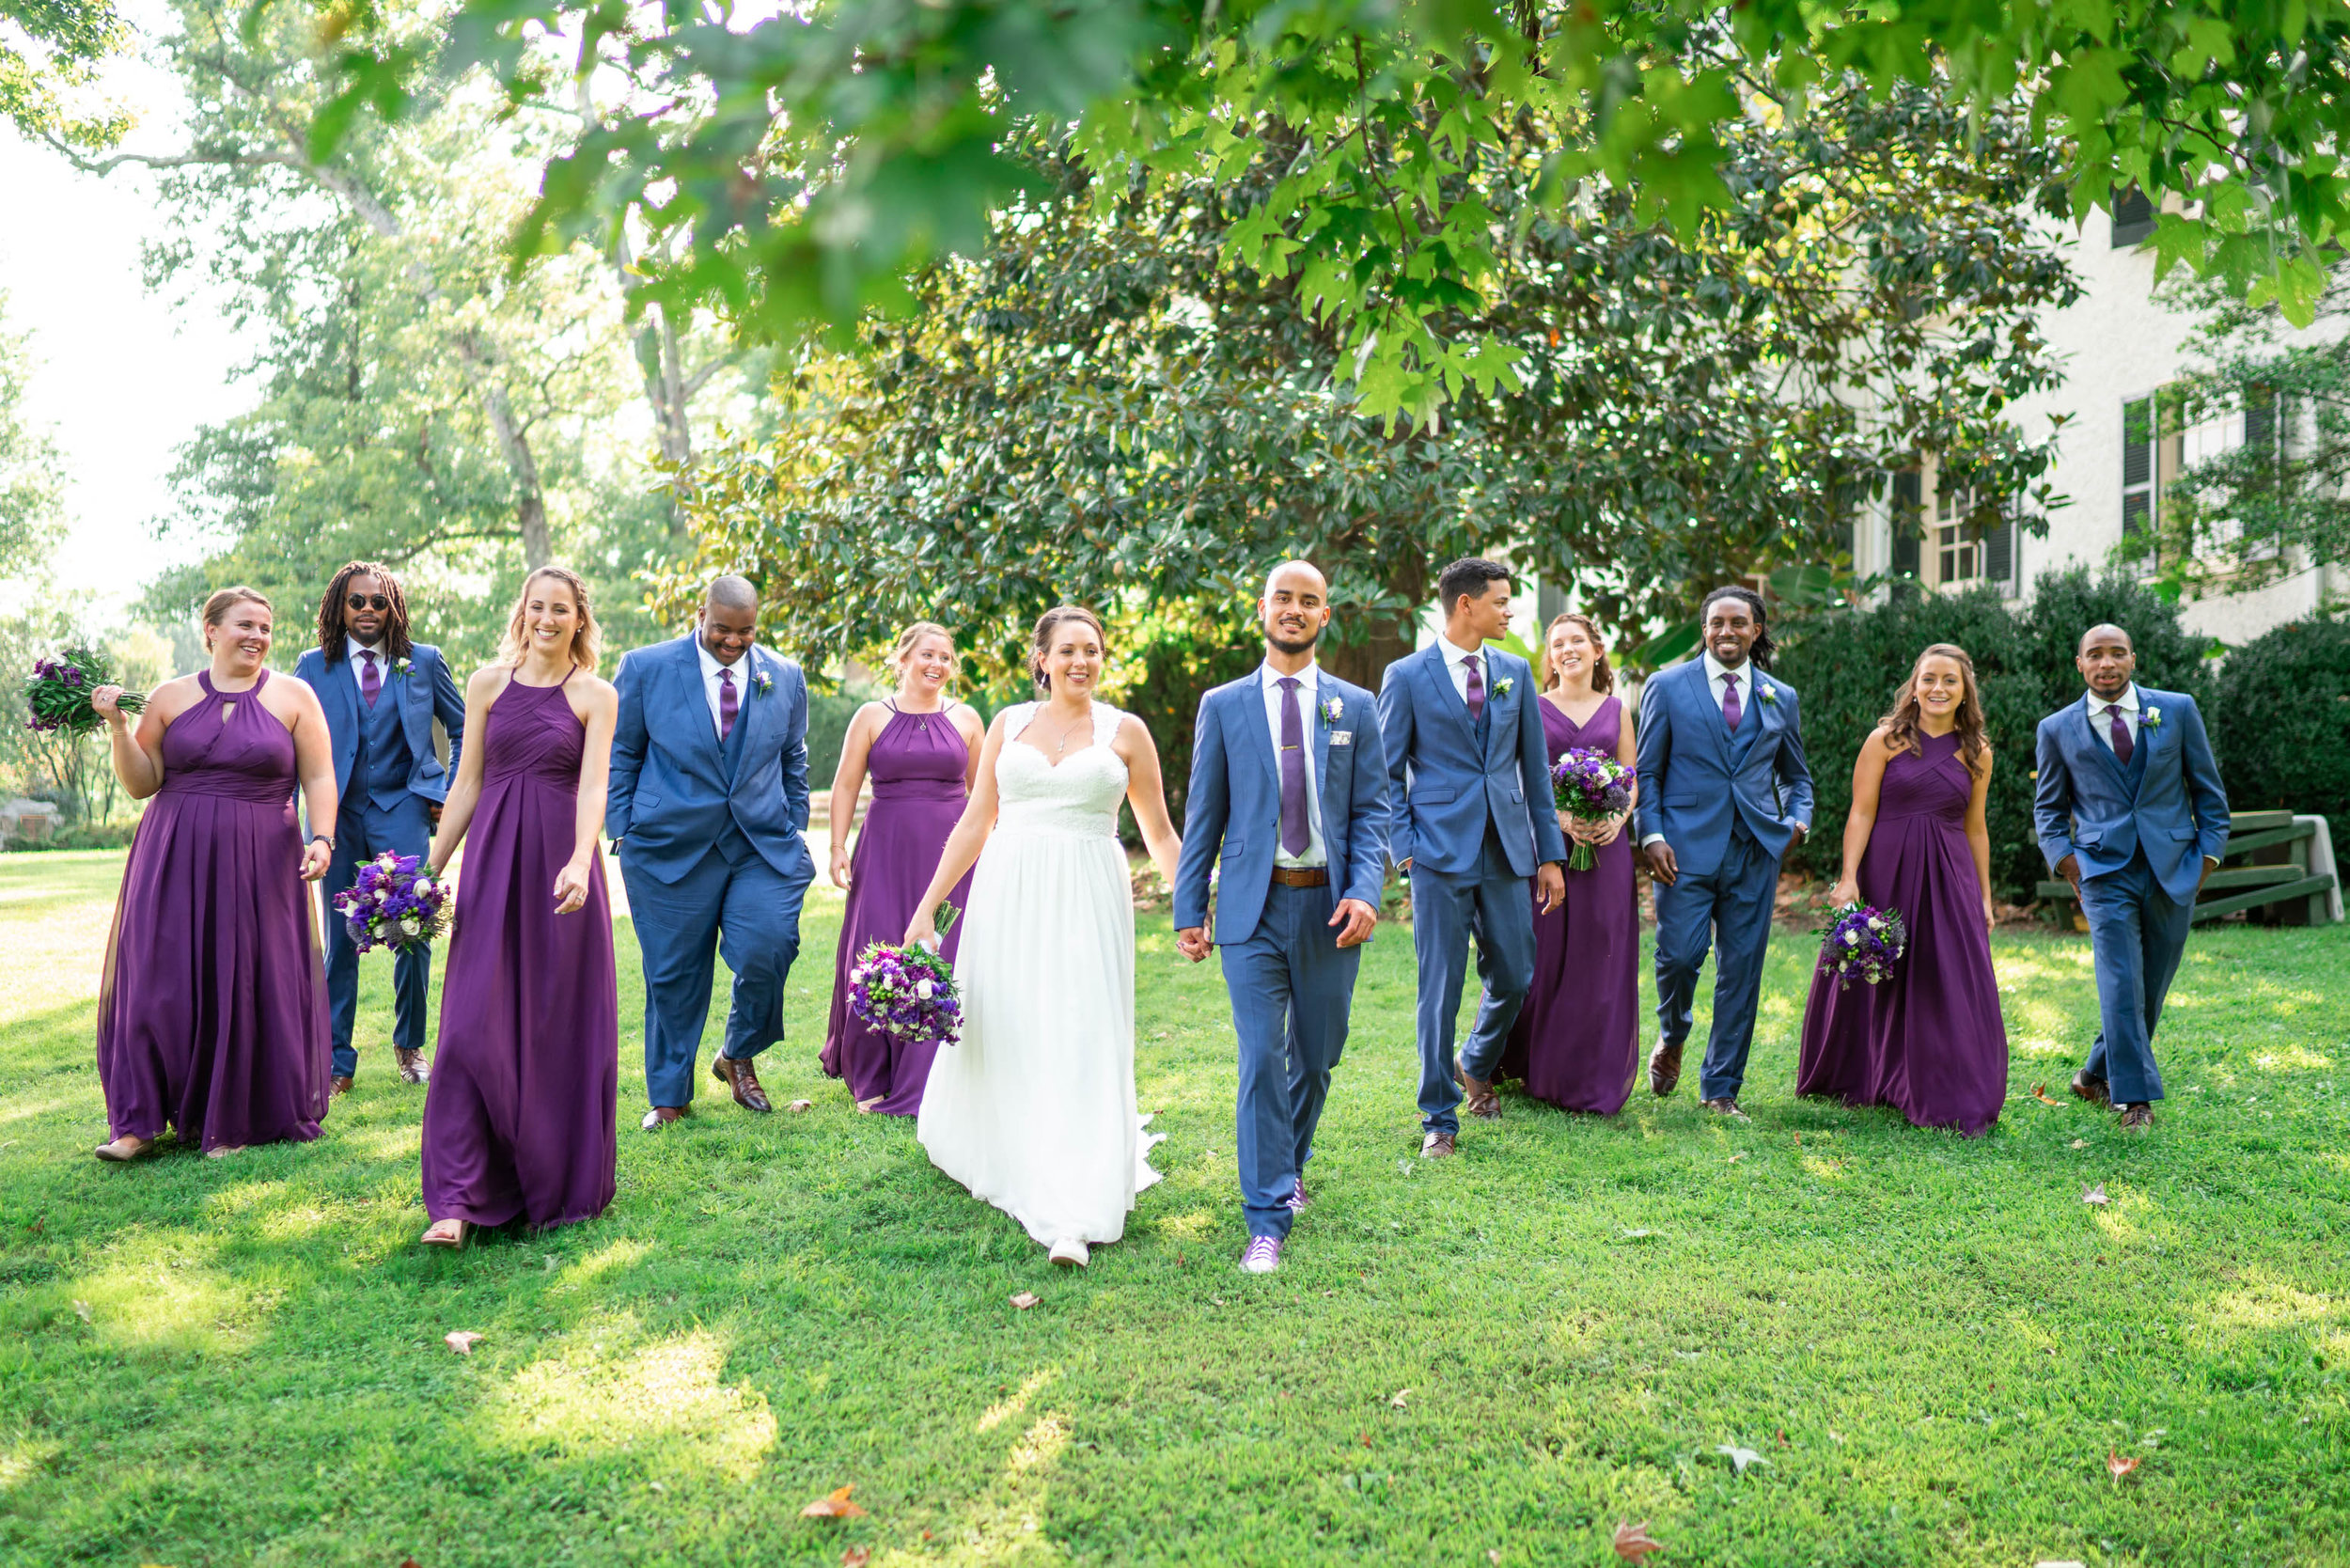 Bride and groom and bridal party walking photo at Rust Manor House